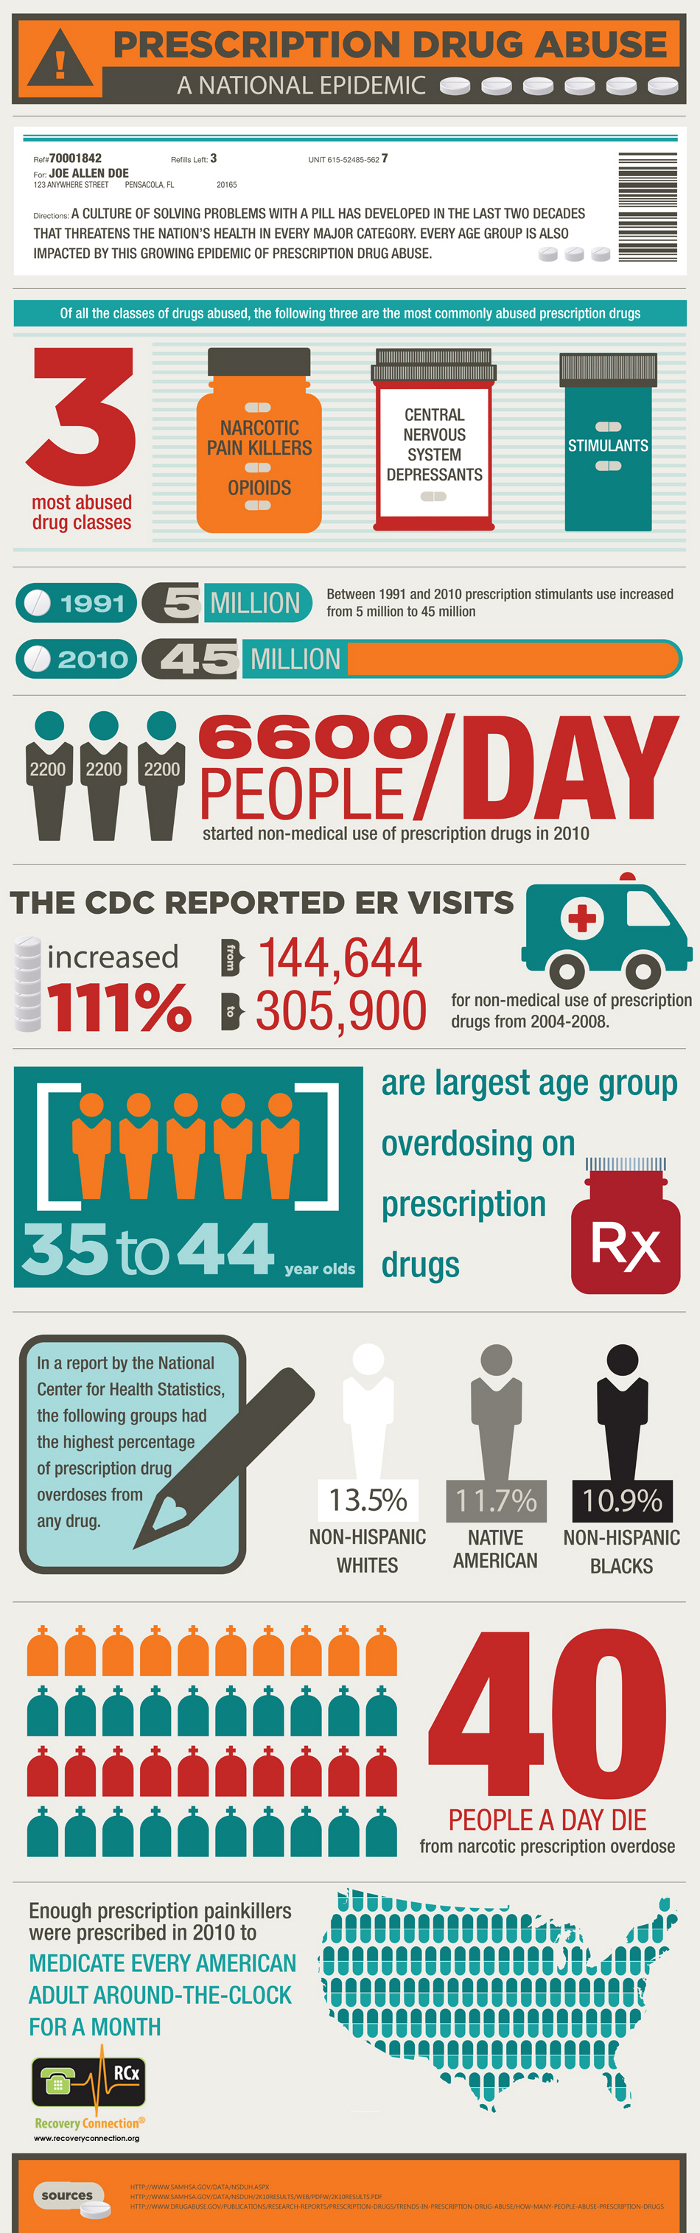 Prescription Drug Abuse Facts and Trends